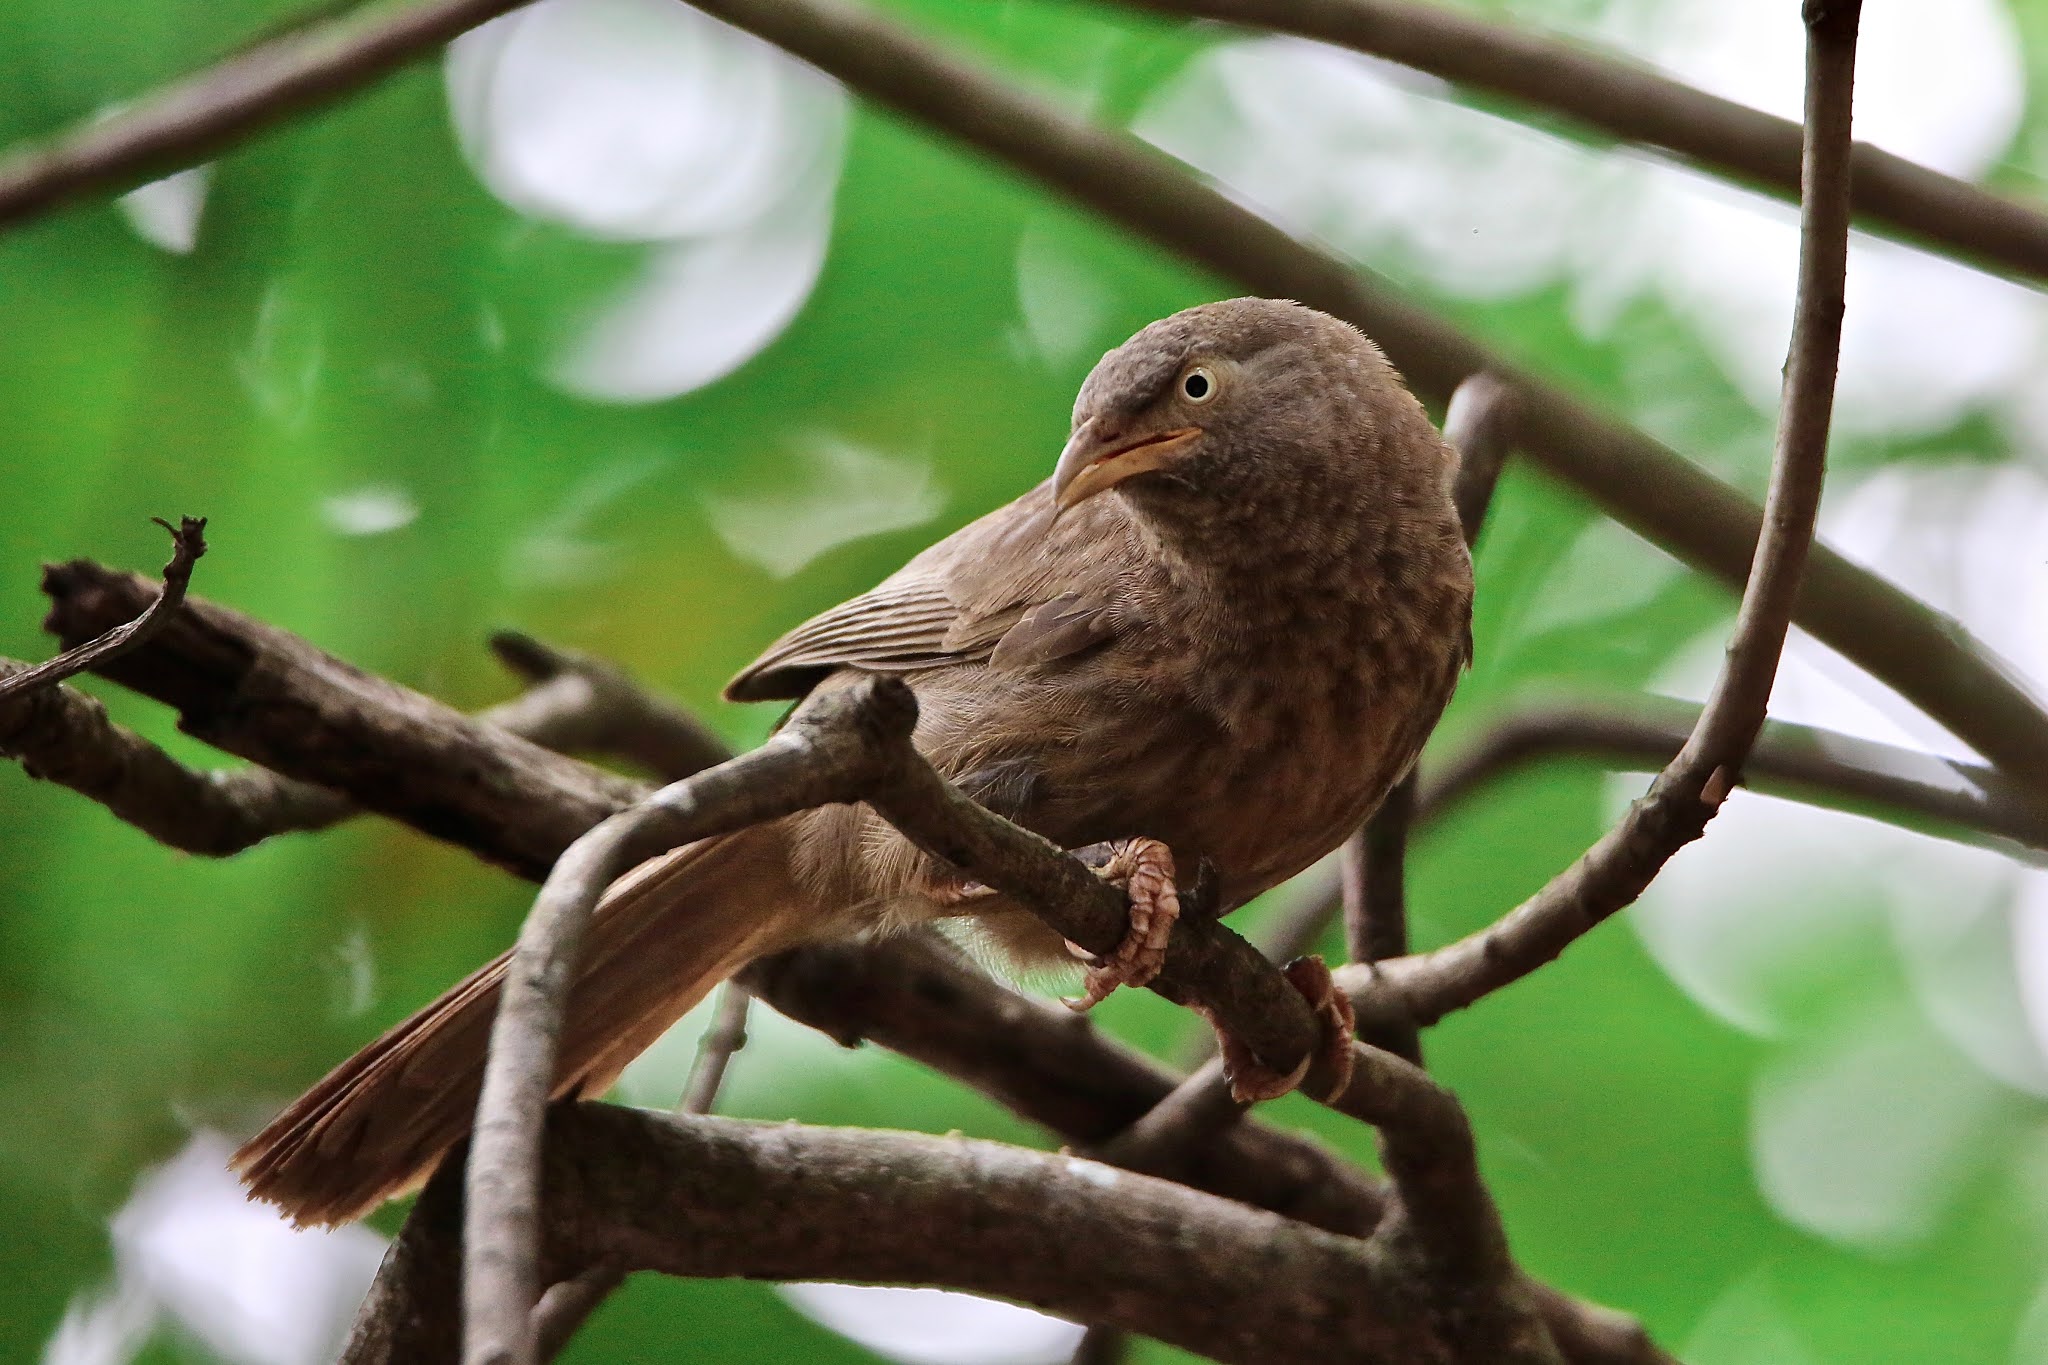 The jungle babbler, Seven Sisters bird image high resolution free